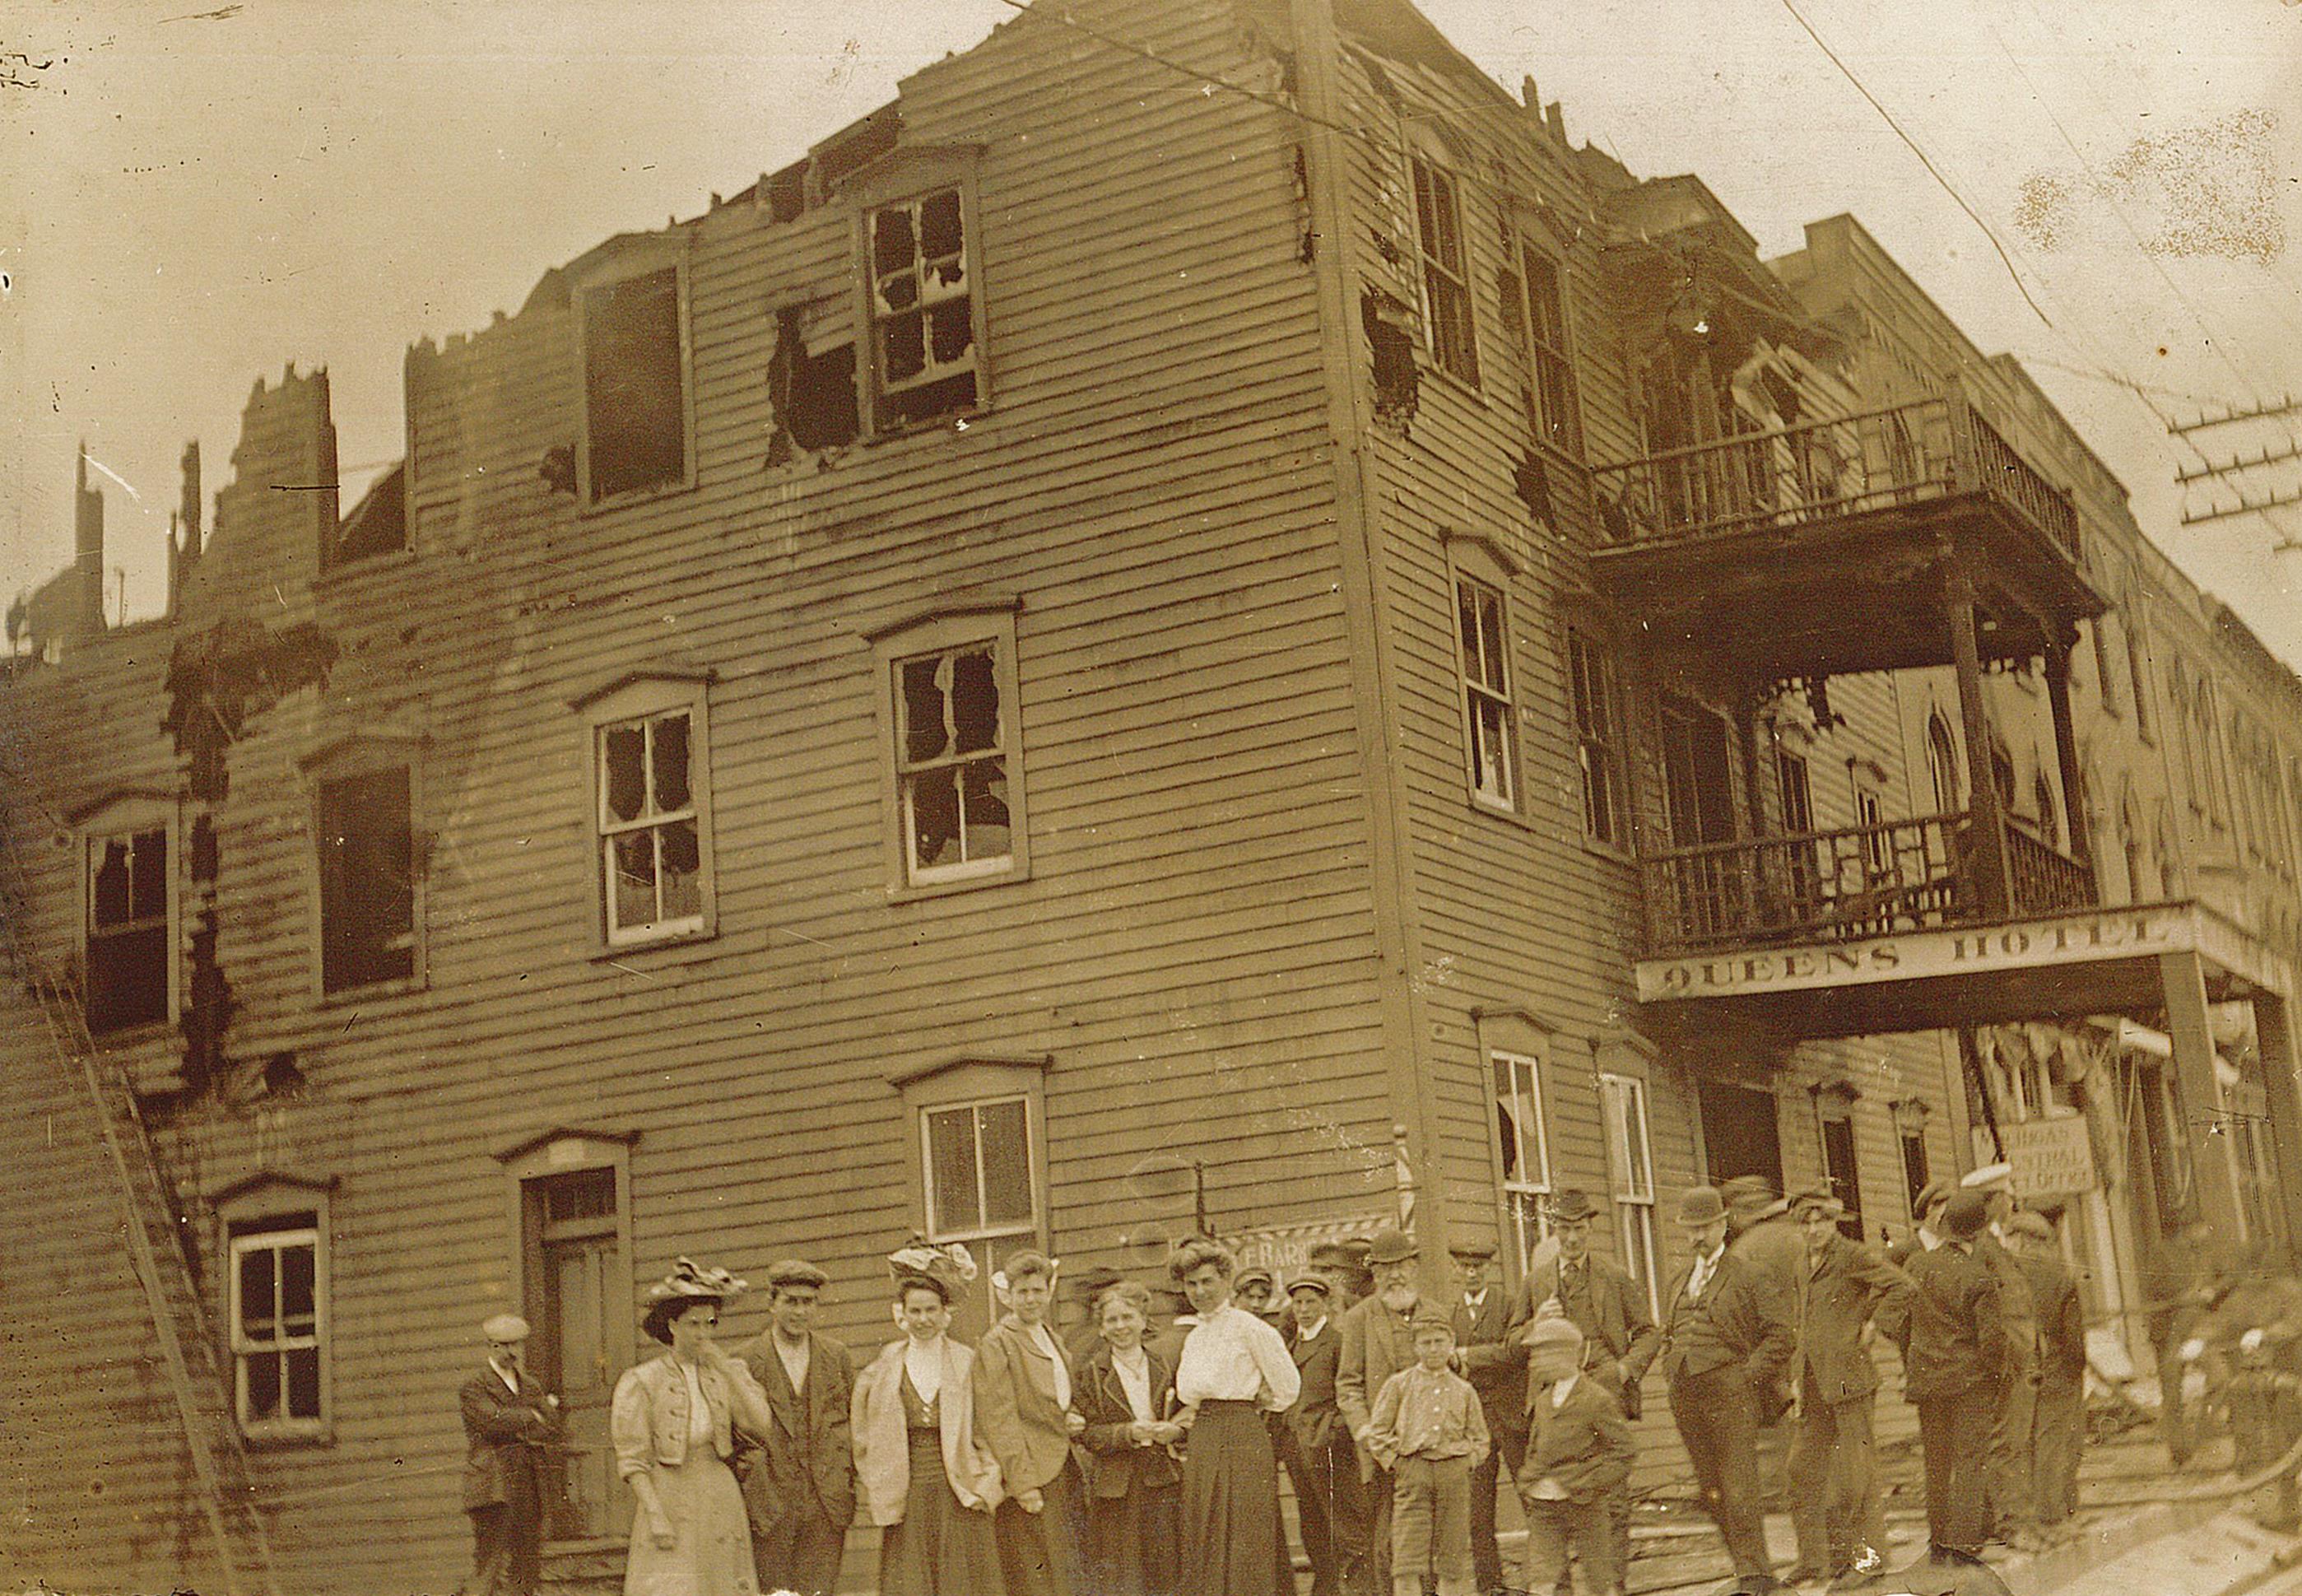 Photo of the Queen's Hotel damaged by fire, a crowd is posed in front of the building.